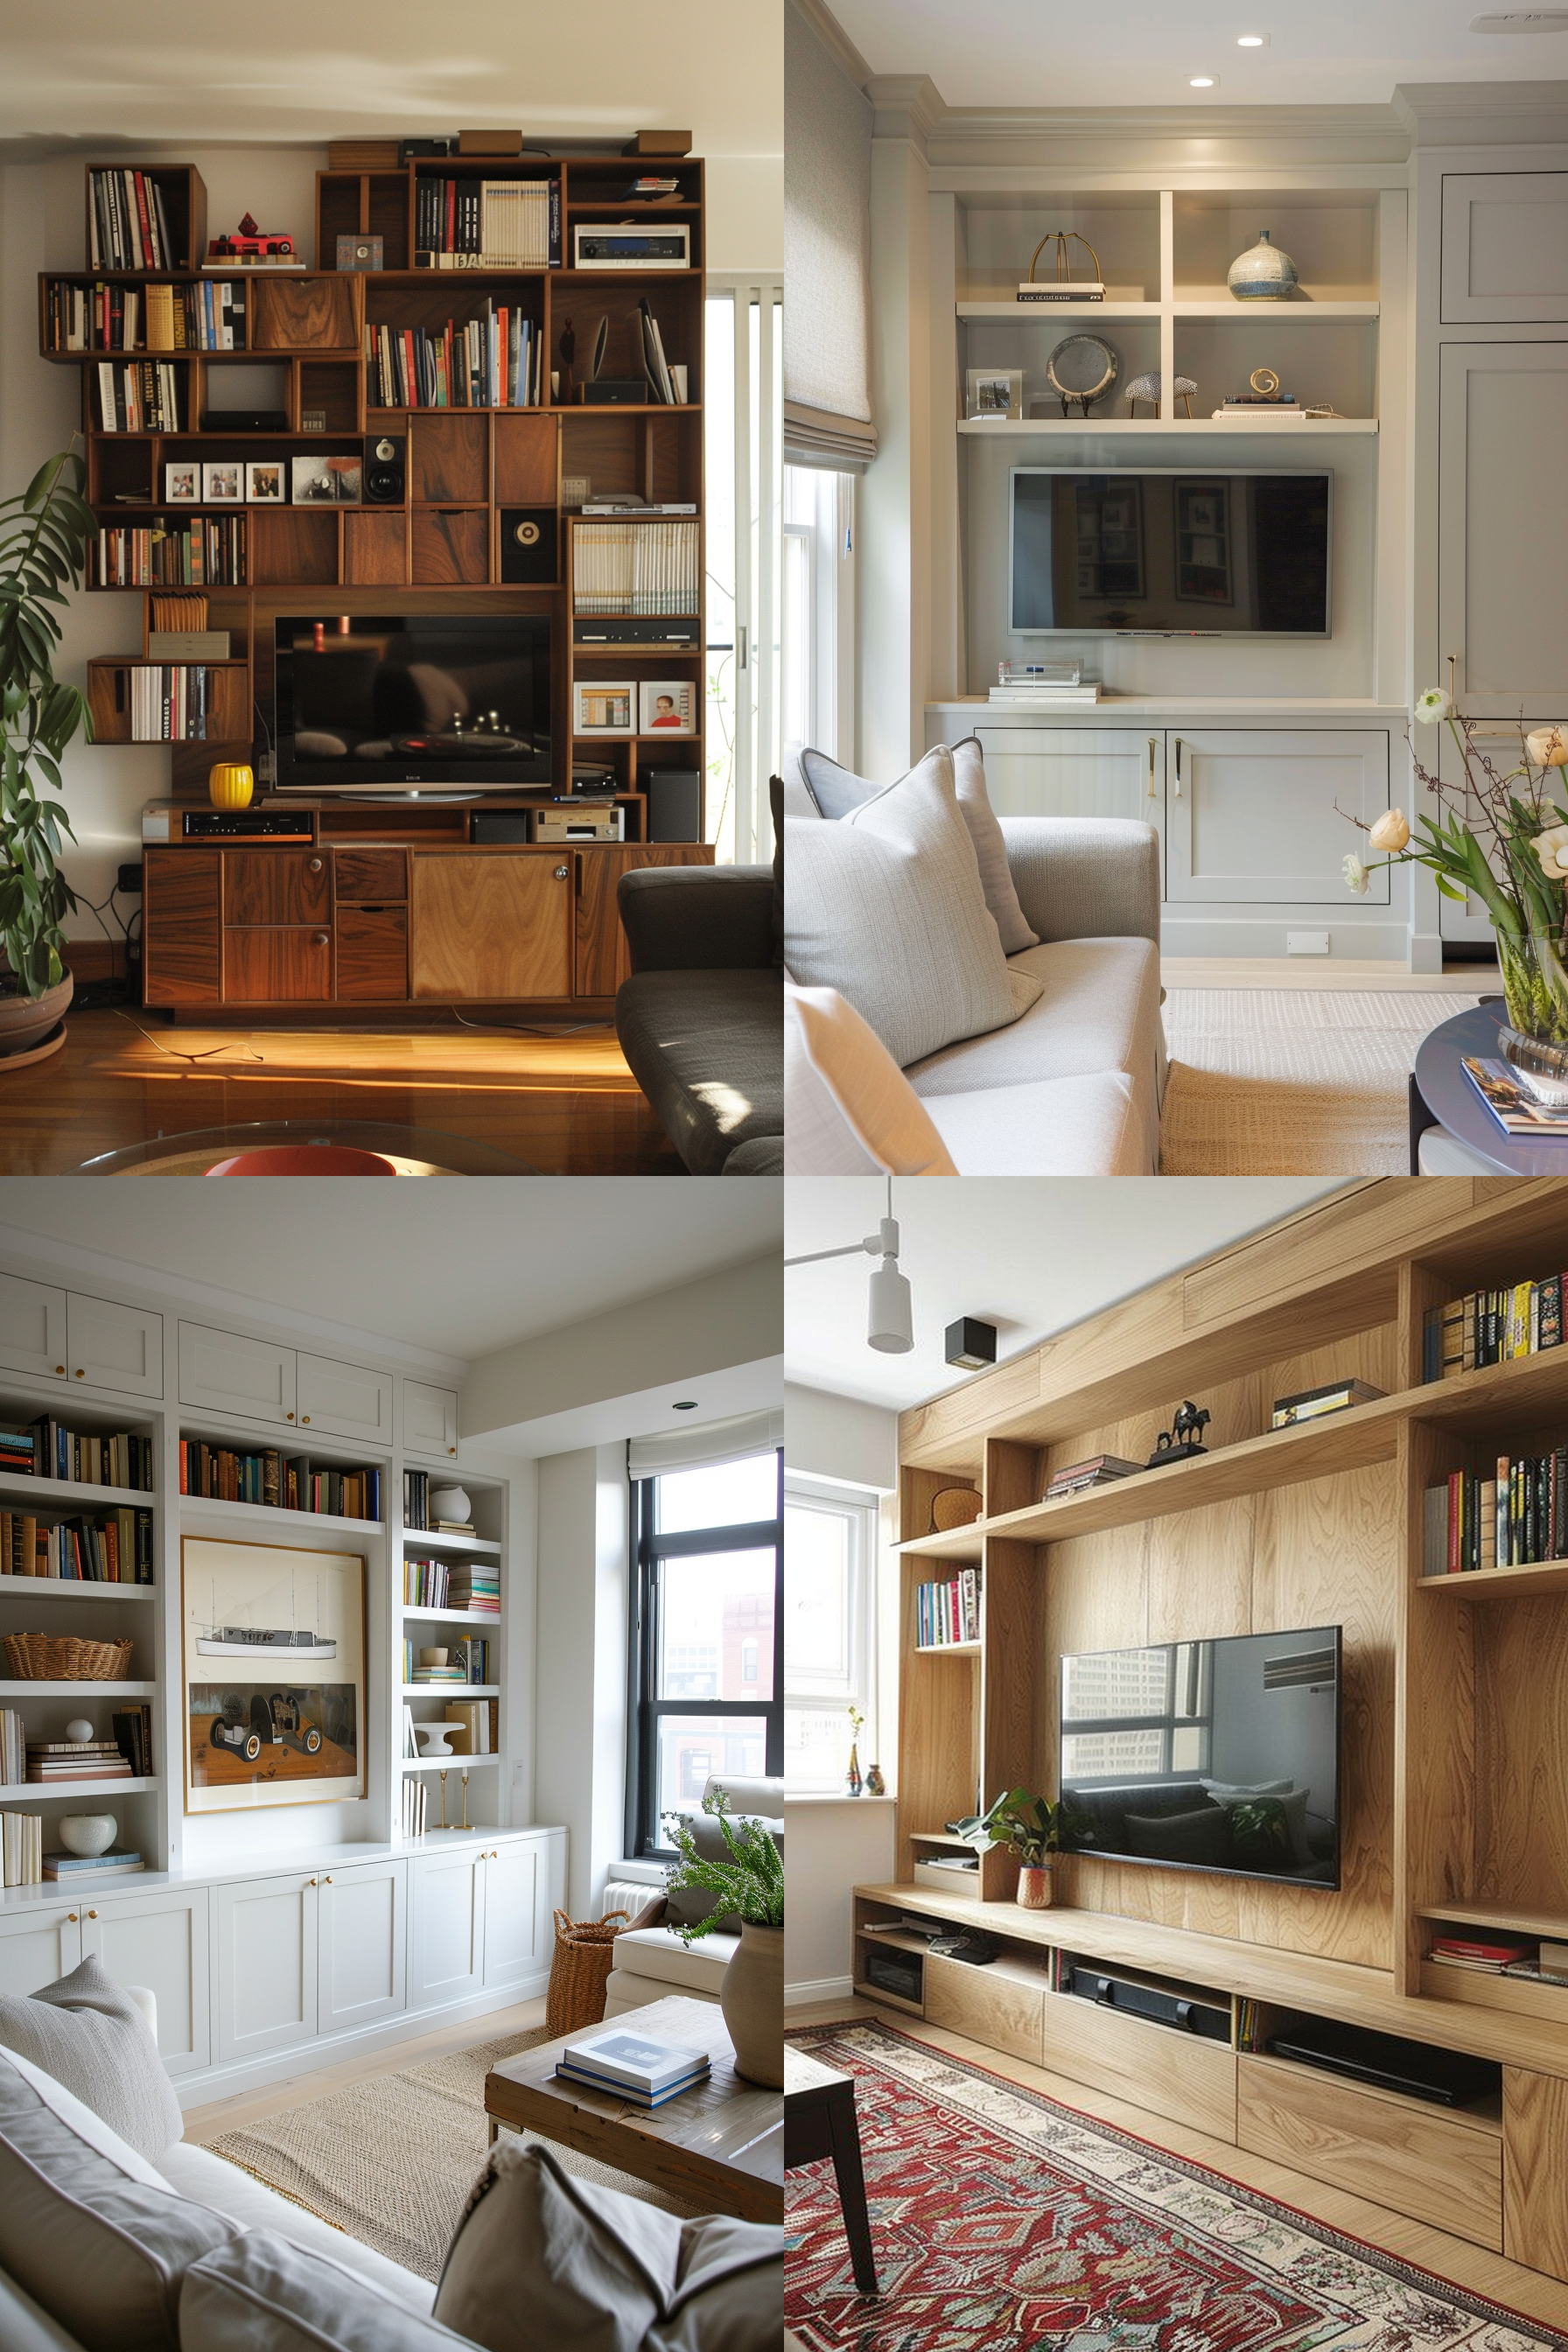 Four images of stylish living rooms featuring various built-in bookshelves and entertainment units in different designs.